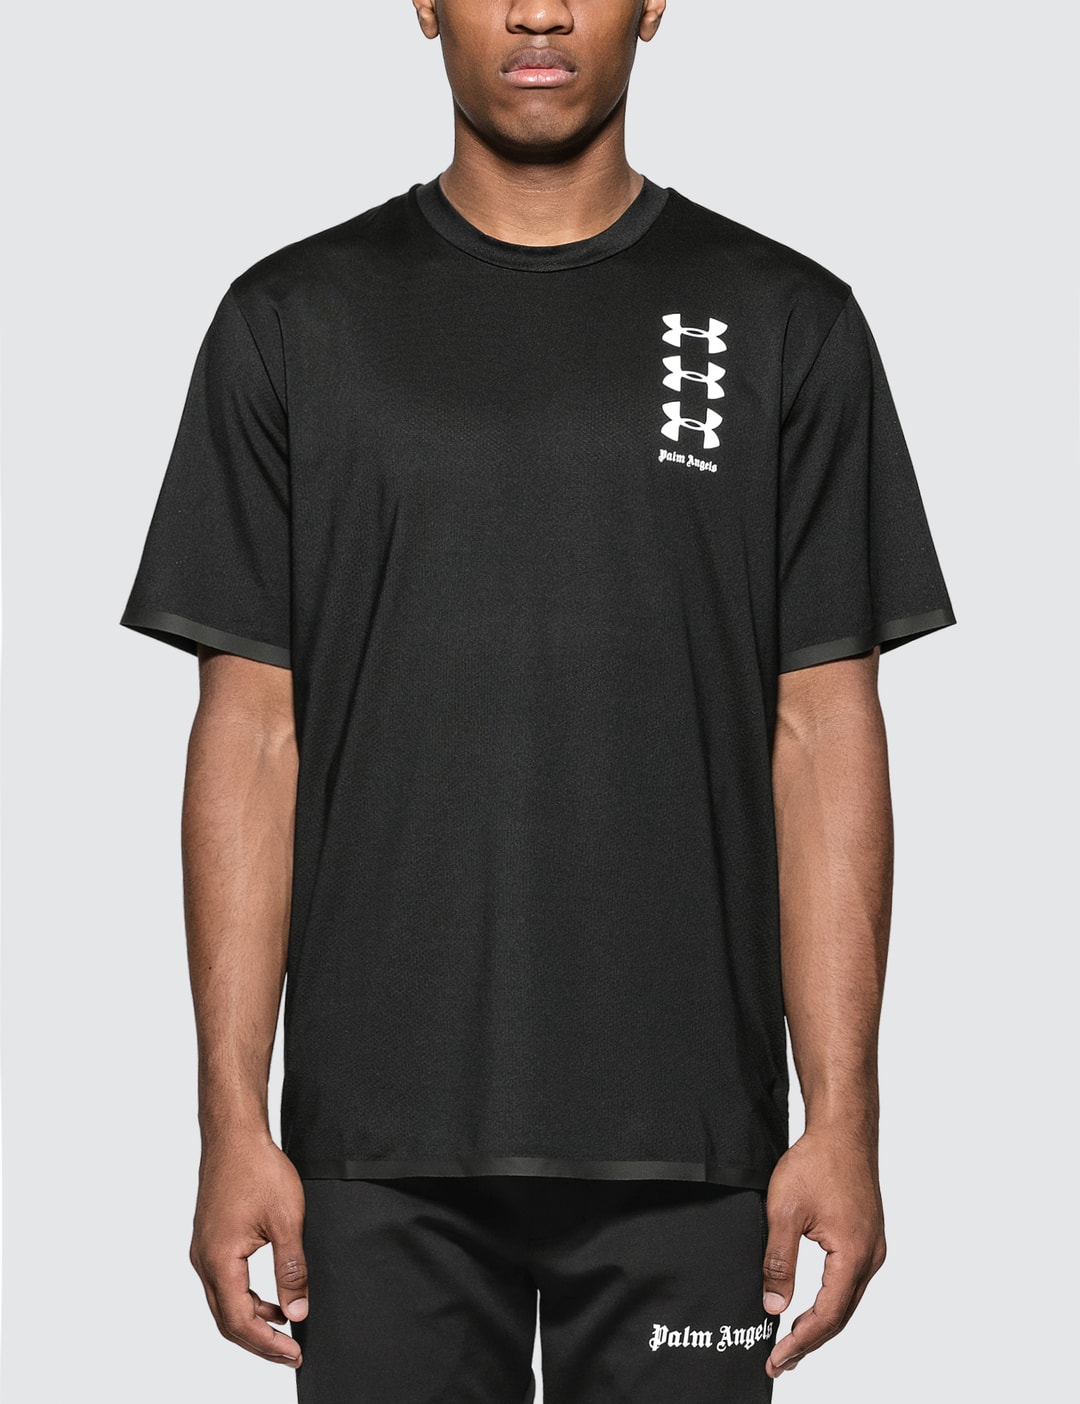 Palm Angels - Under Armour x Palm Angels T-Shirt | HBX - Globally Curated Fashion and Lifestyle by